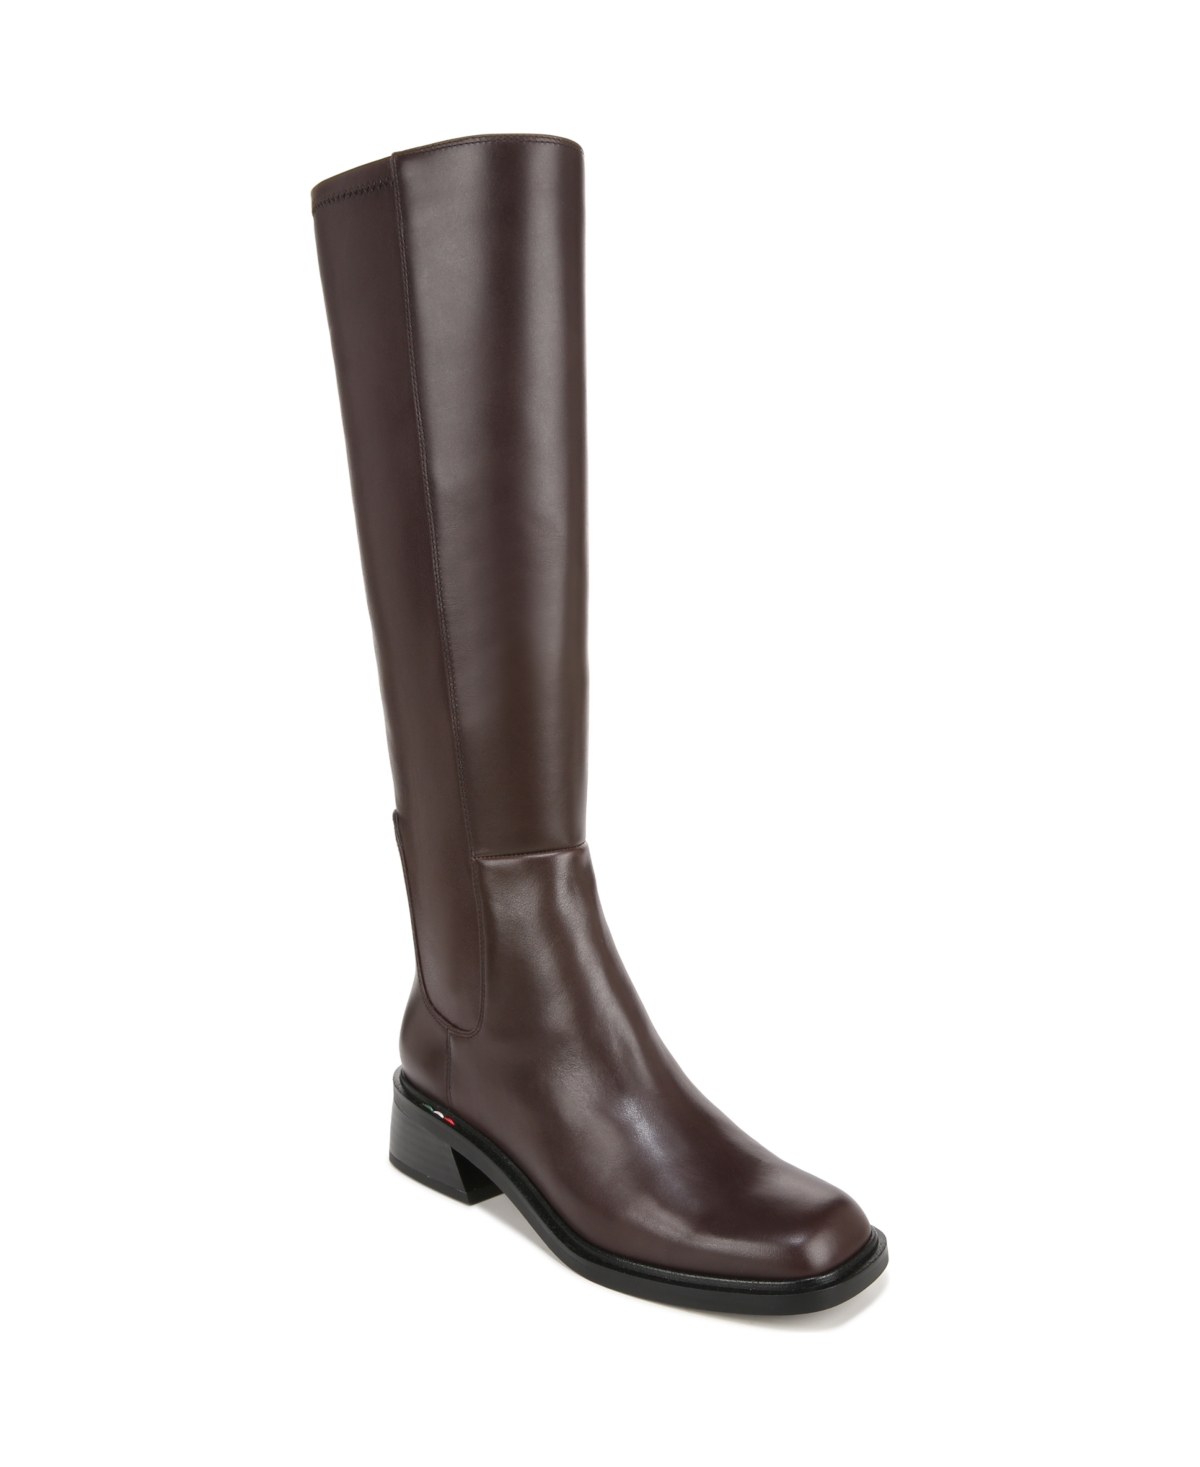 Women's Giselle Wide Calf High Shaft Boots - Castagno Brown Leather